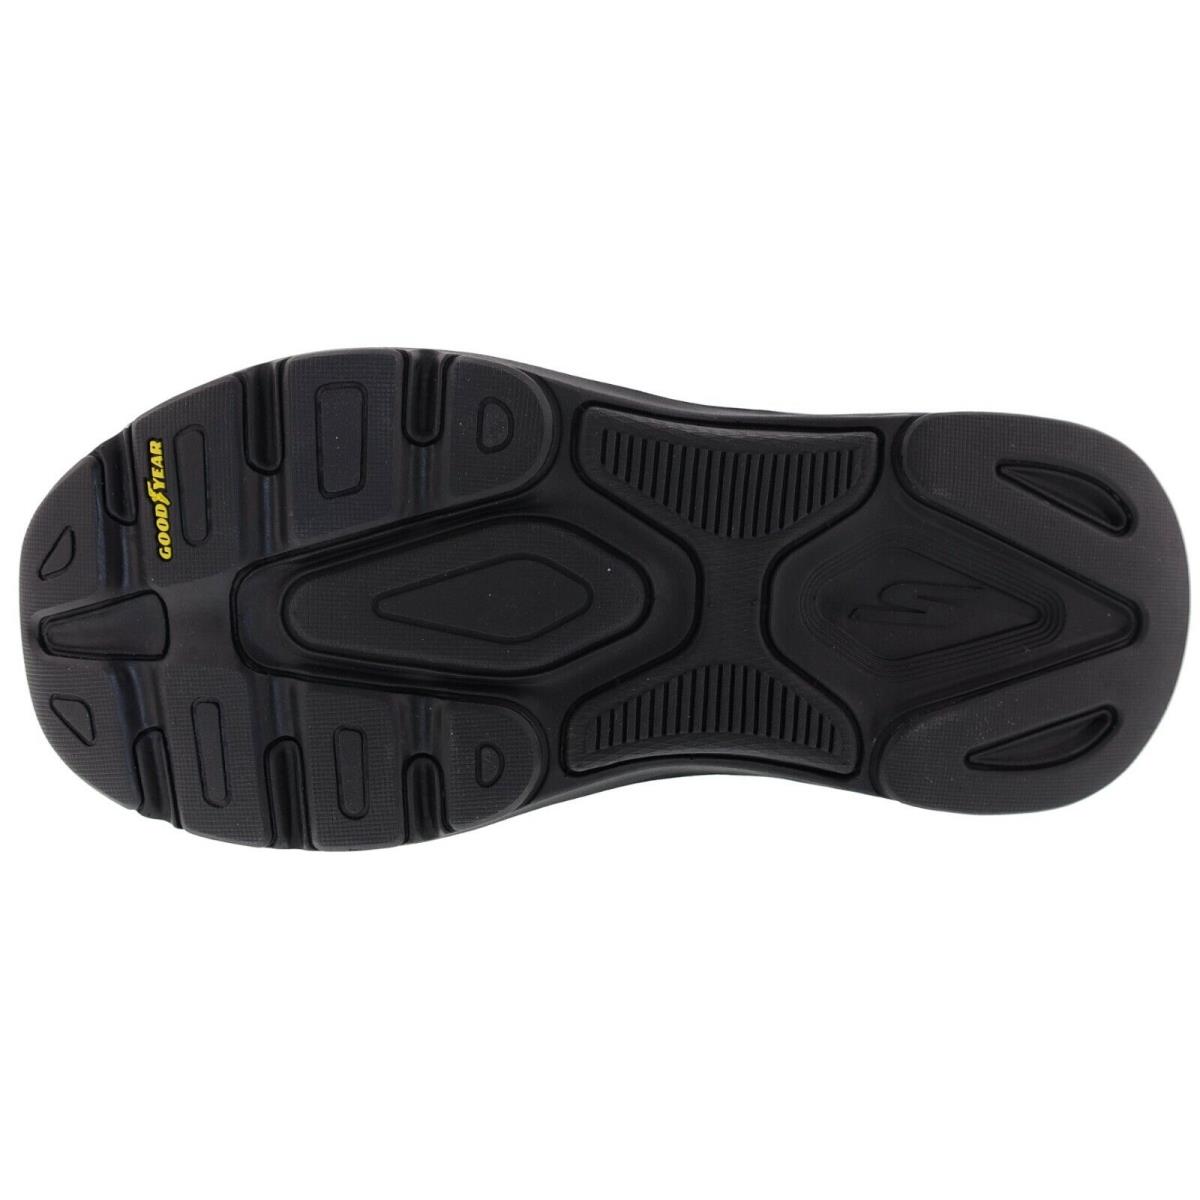 Skechers shoes Arch Rugged Man 3